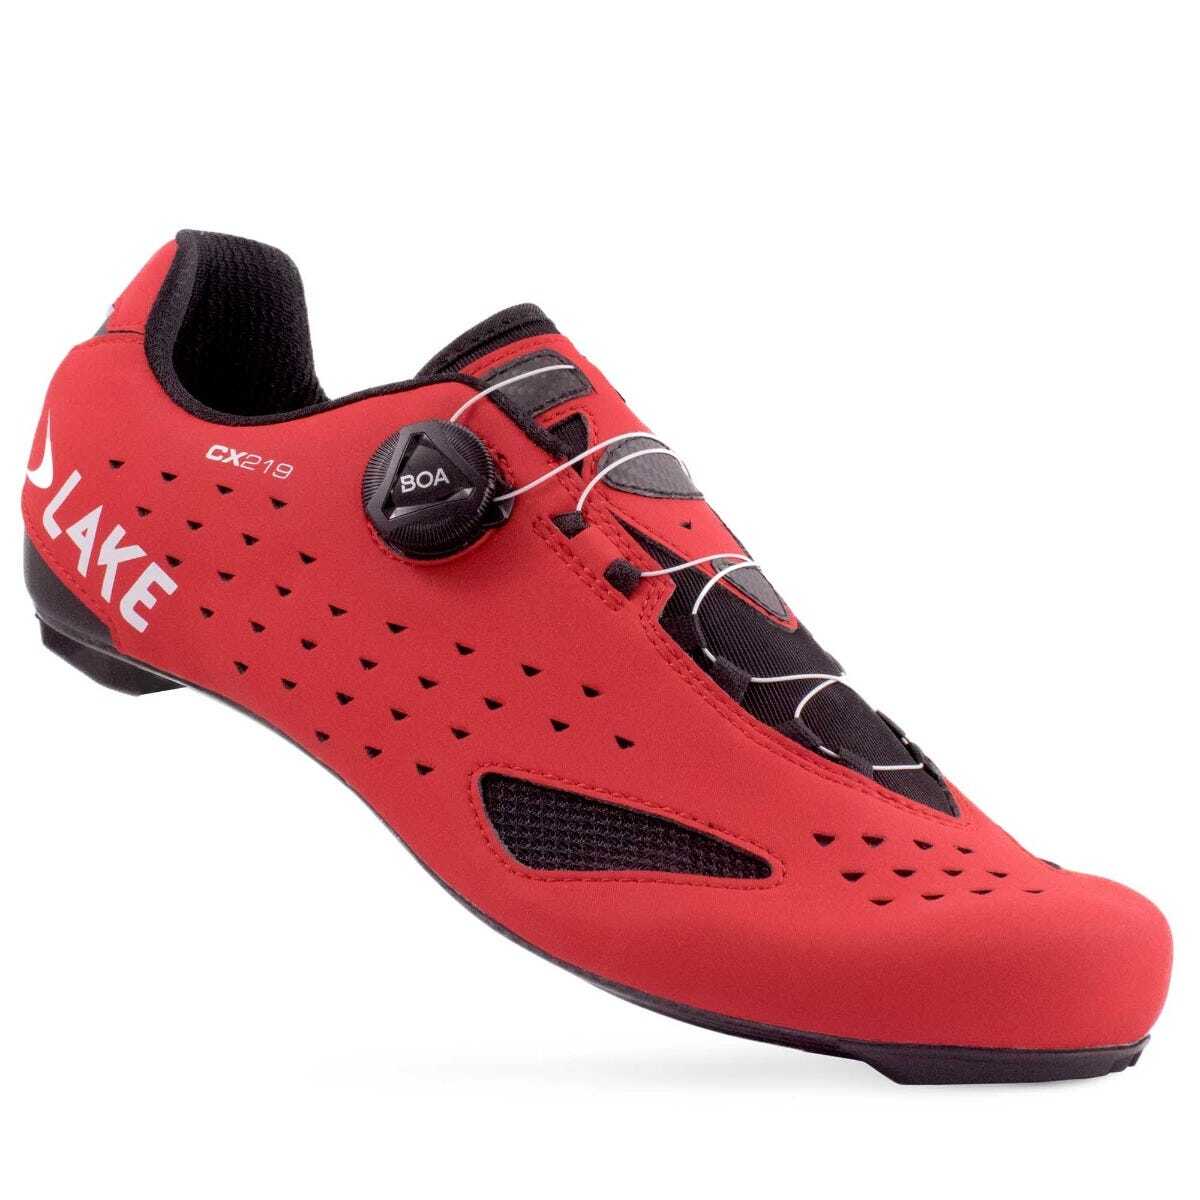 LAKE CX219 Road Shoe BOA Red | £ | Accessories | Shoes - Road | Elmy  Cycles Ipswich Suffolk Bike Shop